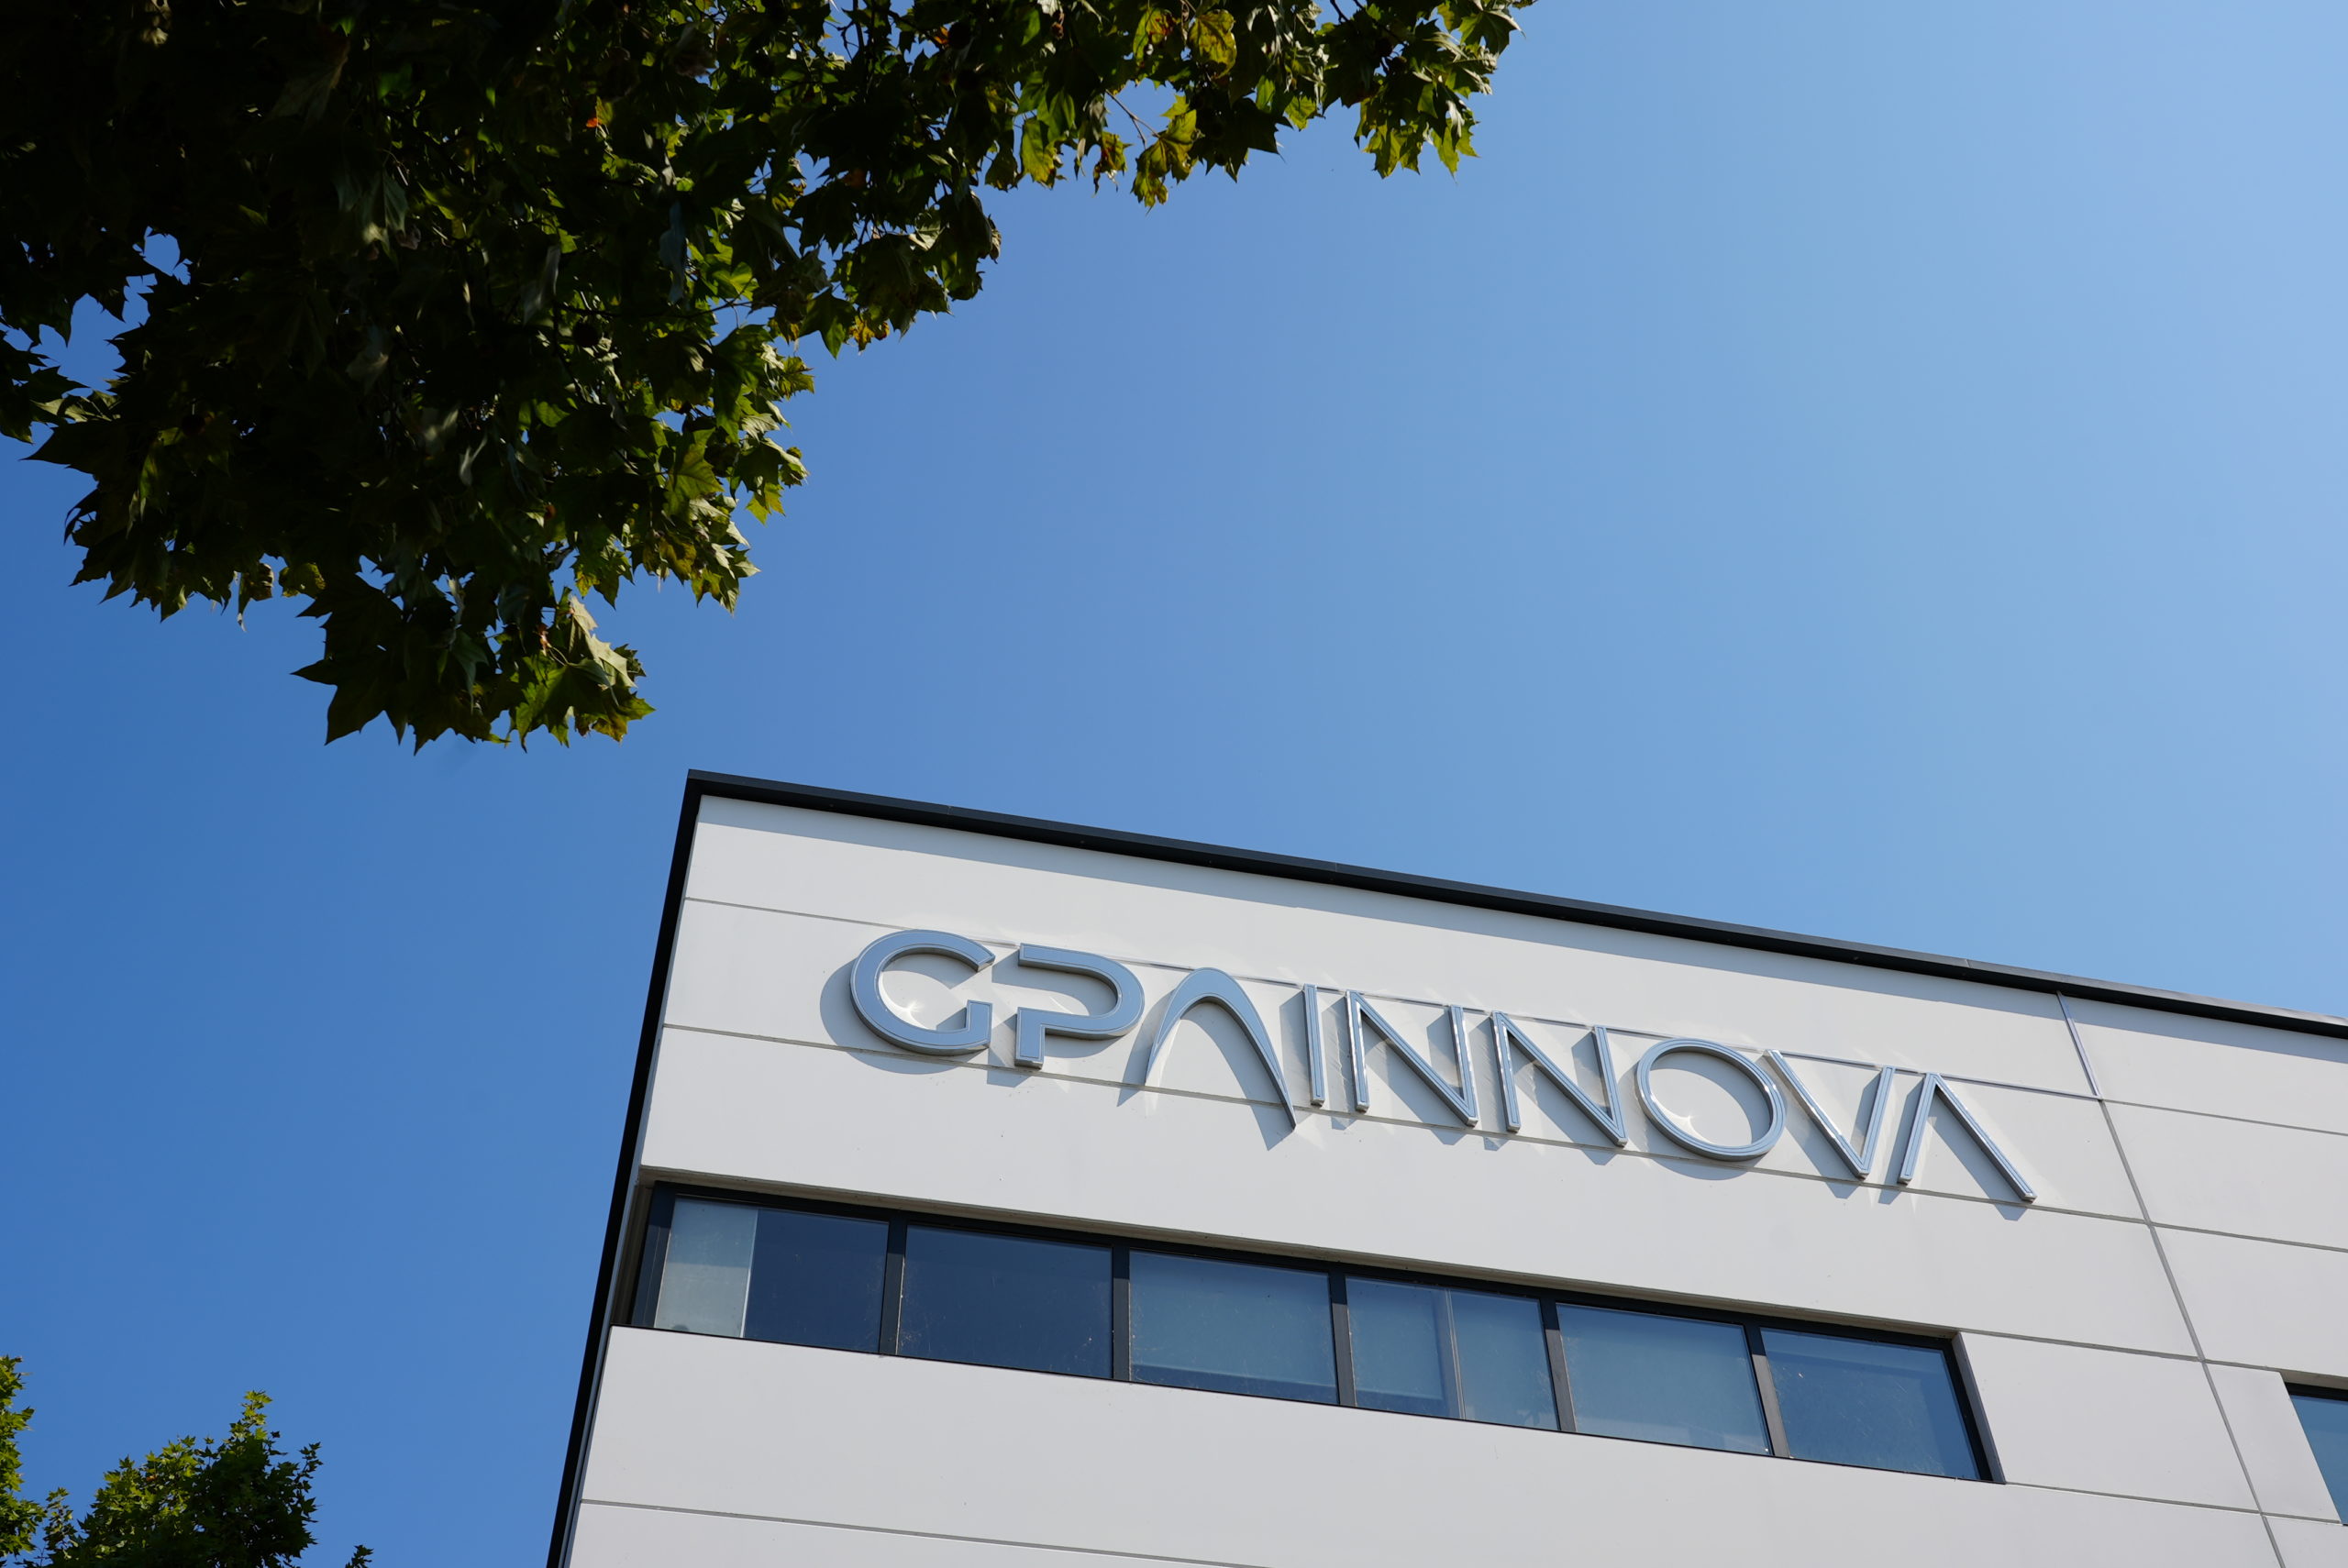 GPAINNOVA ranks as the 12th Europe’s fastest-growing company in the mechanical engineering sector, as reported by Financial Times